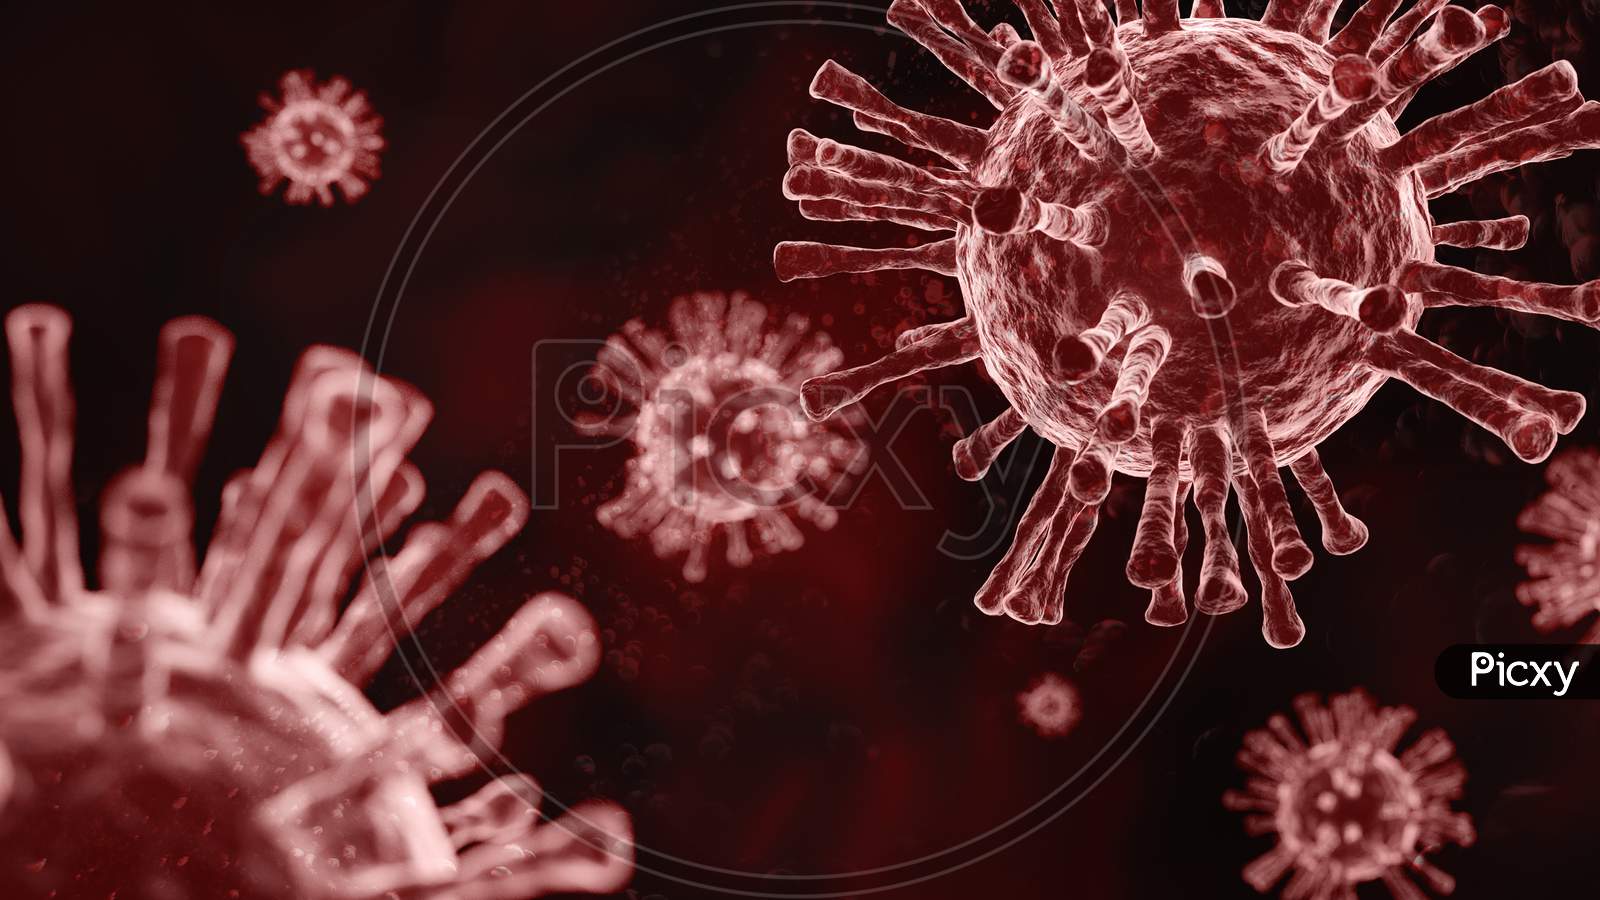 Super Closeup Coronavirus Covid-19 In Human Lung Body Background. Science Microbiology Concept. Red Corona Virus Outbreak Epidemic. Medical Health Virology Infection Research. 3D Illustration